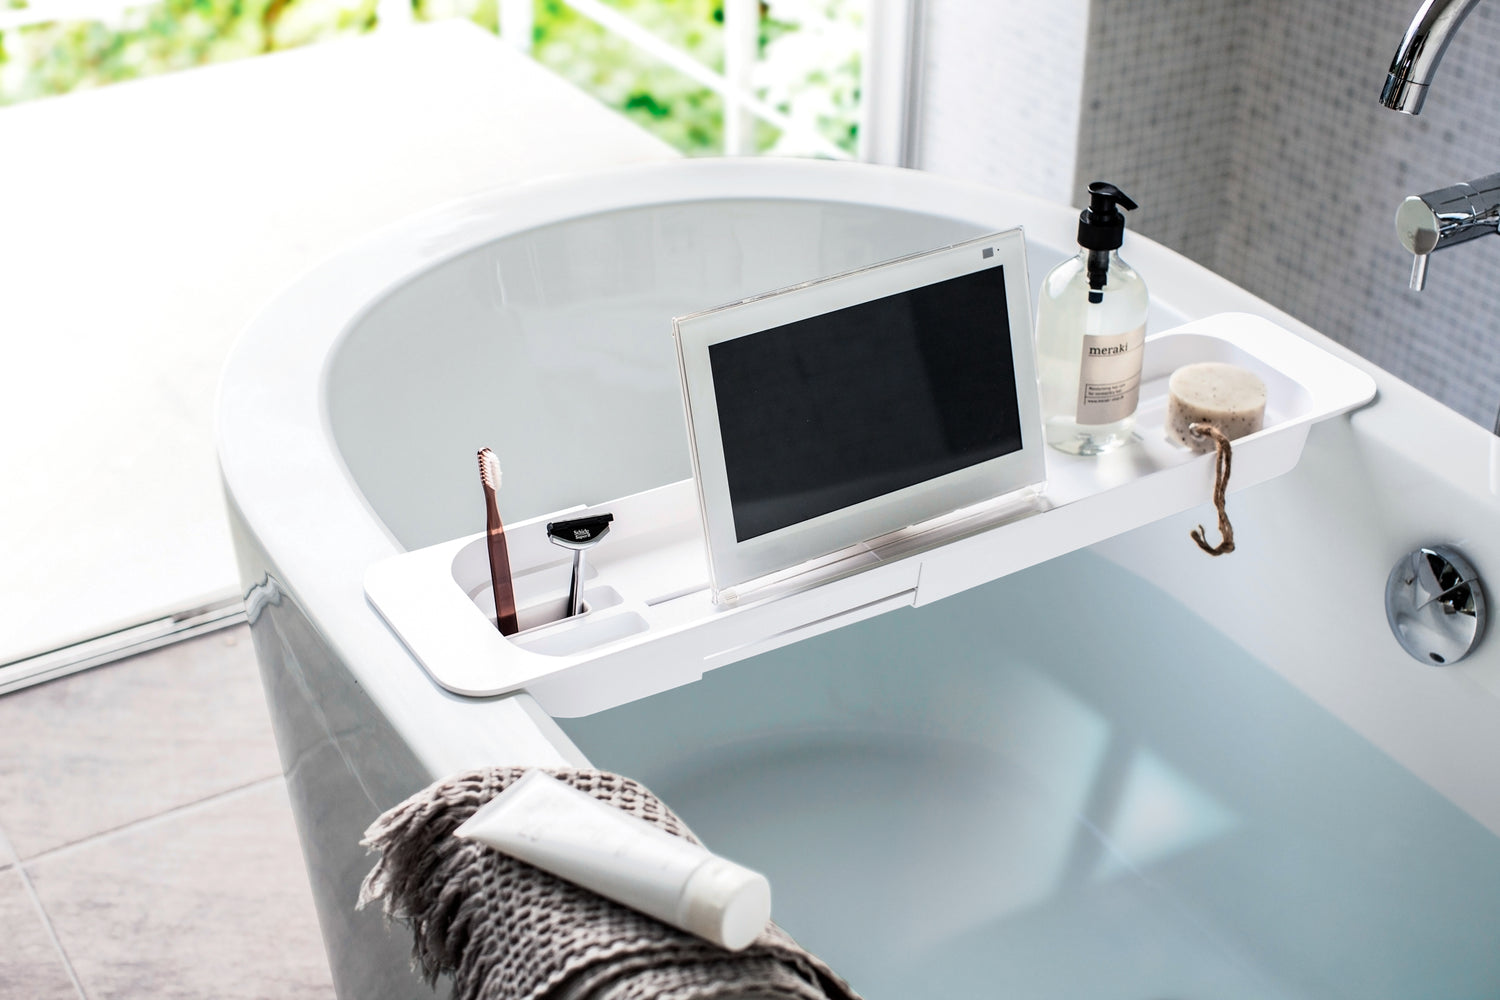 View 5 - White Expandable Bathtub Caddy holding beauty items and tablet by Yamazaki Home.